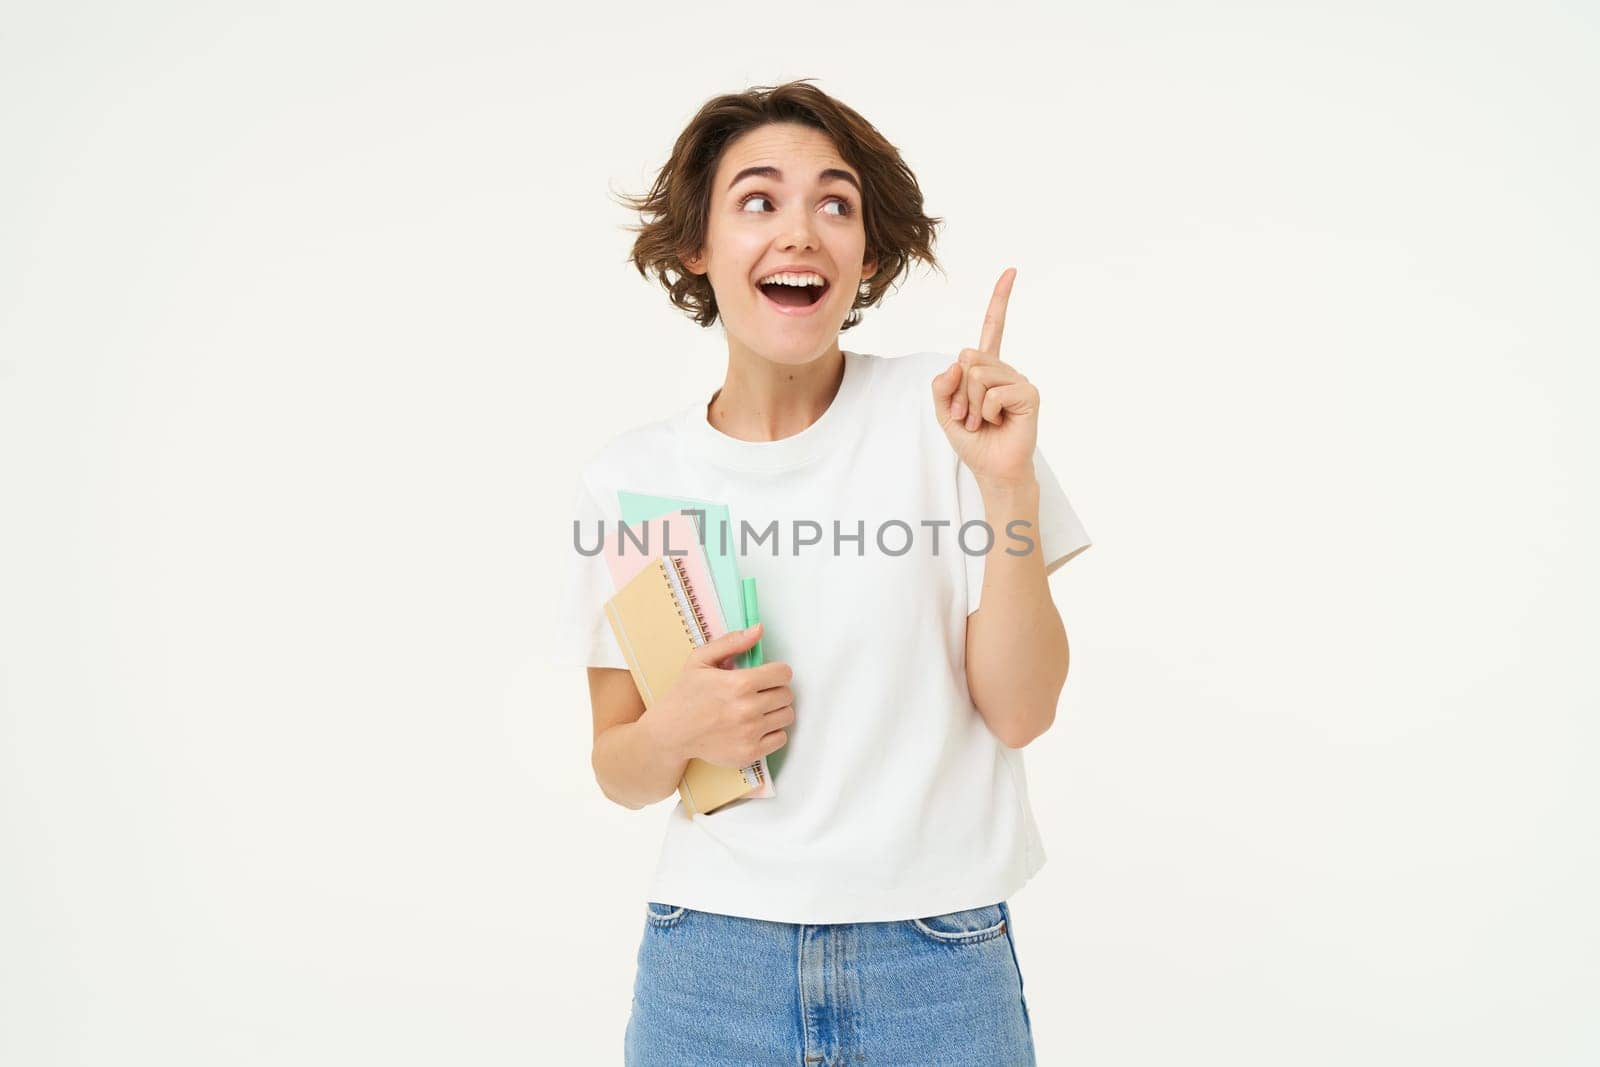 Portrait of brunette woman laughing, student with notebooks pointing at upper right corner, showing banner or advertisement, standing over white studio background.